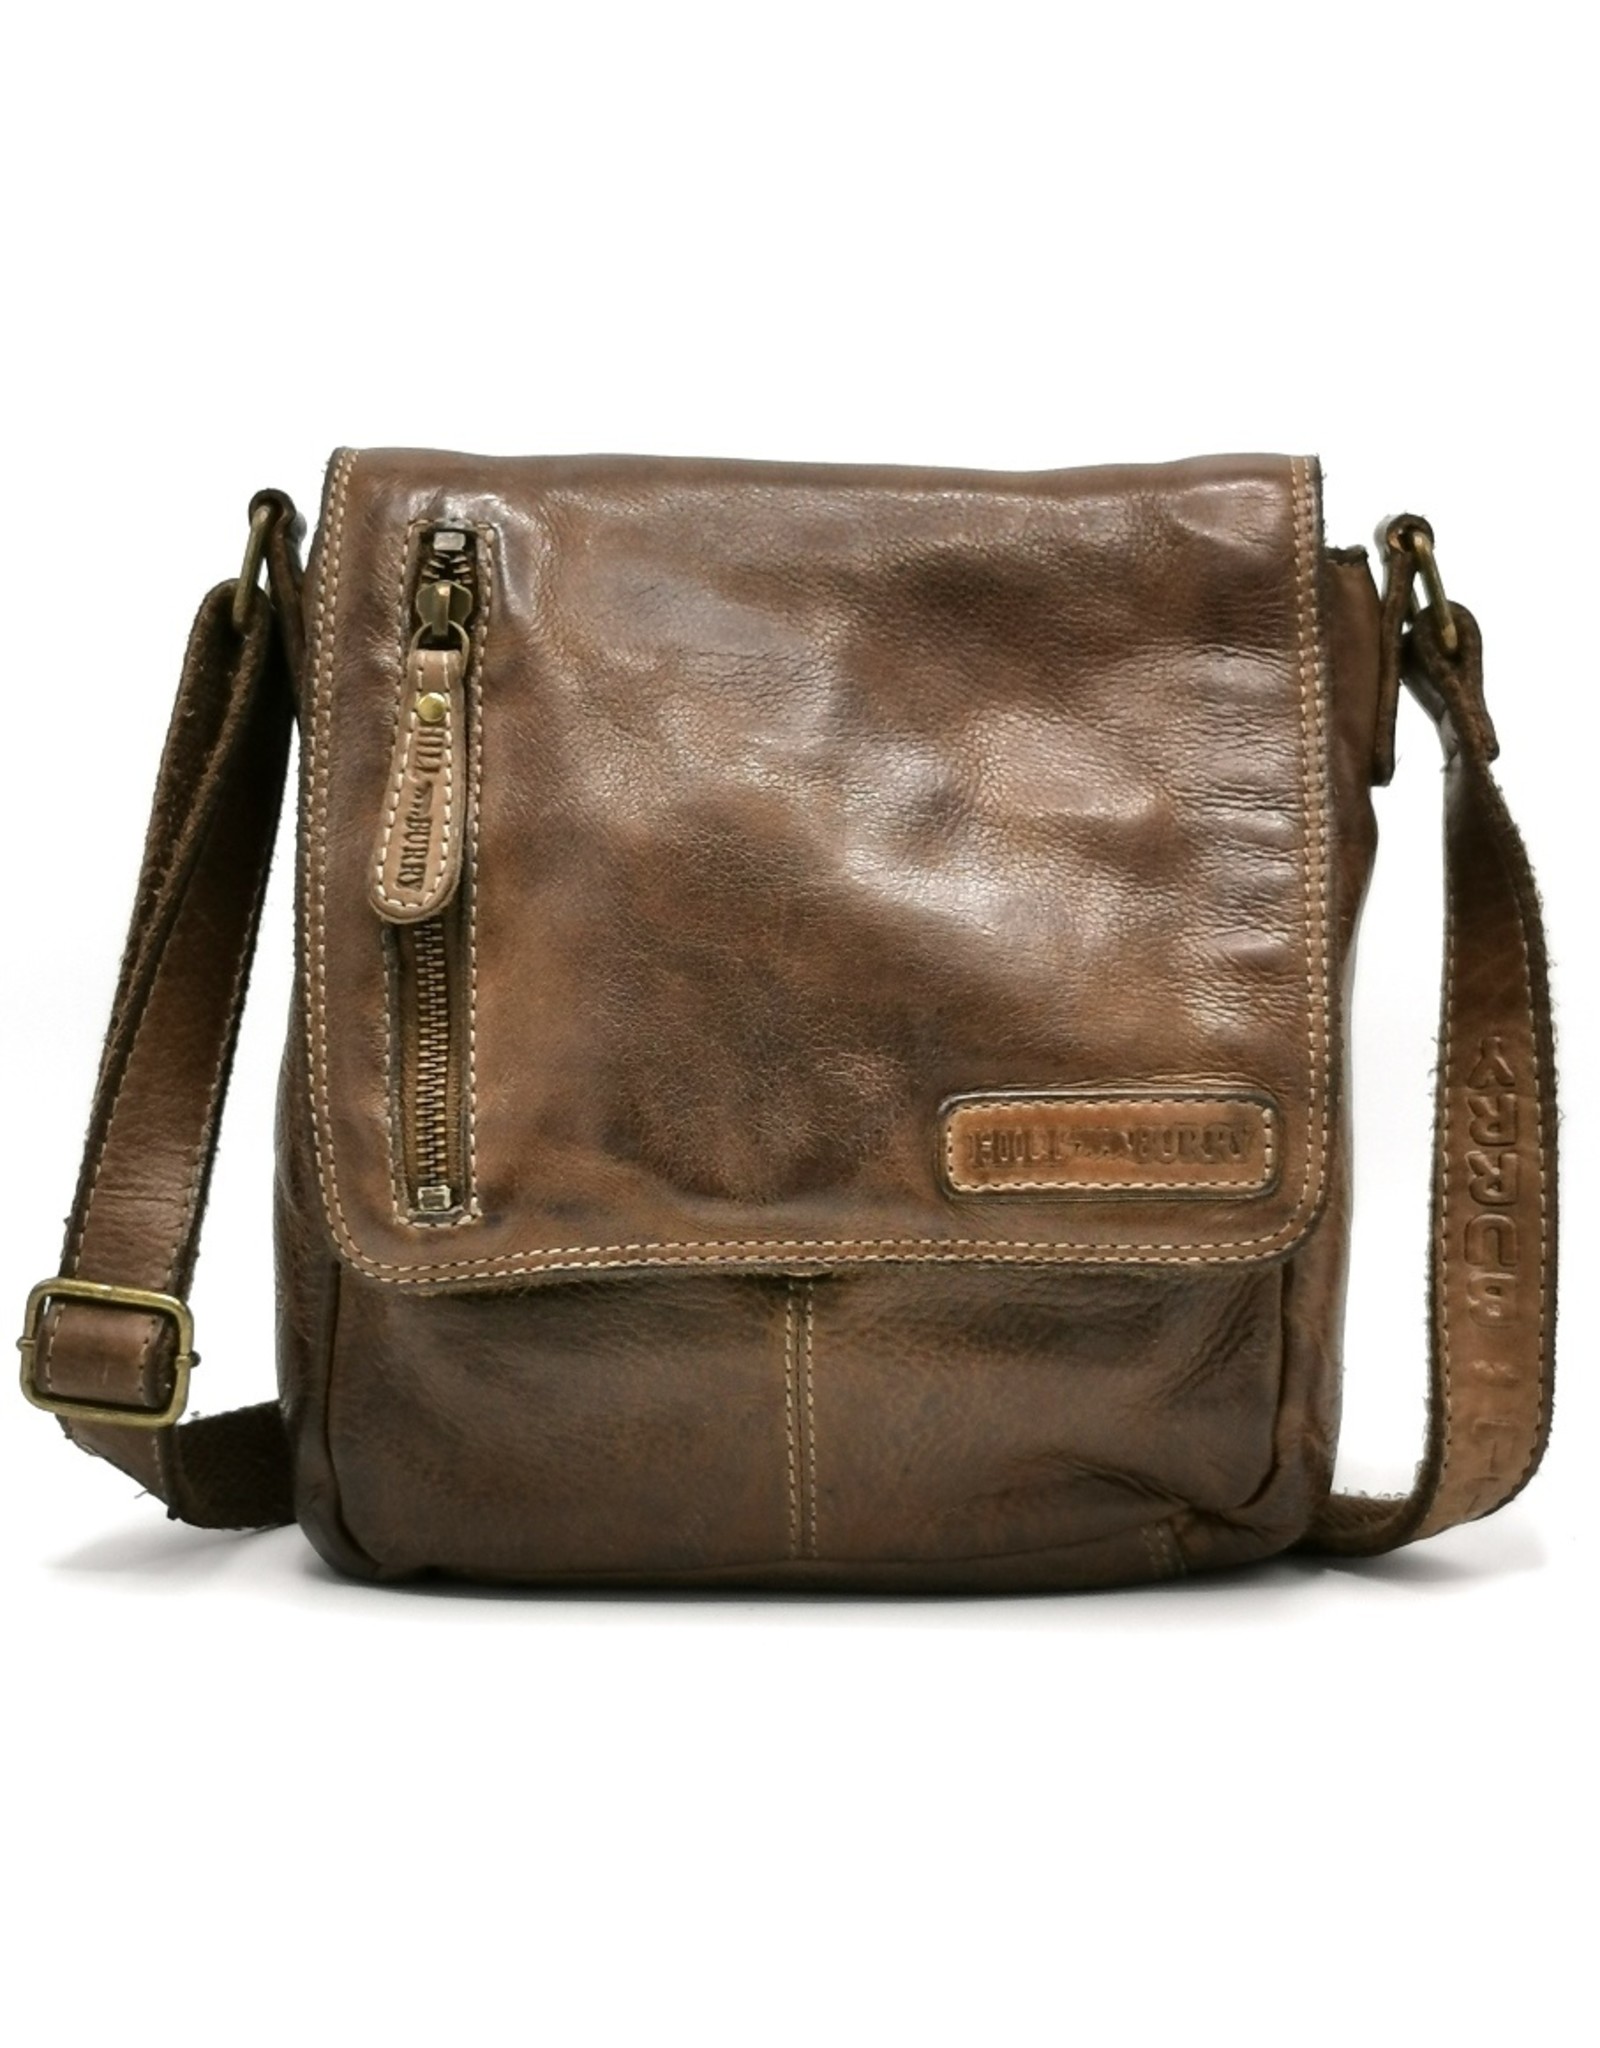 HillBurry Leather bags - HillBurry Crossbody with cover taupe (small)